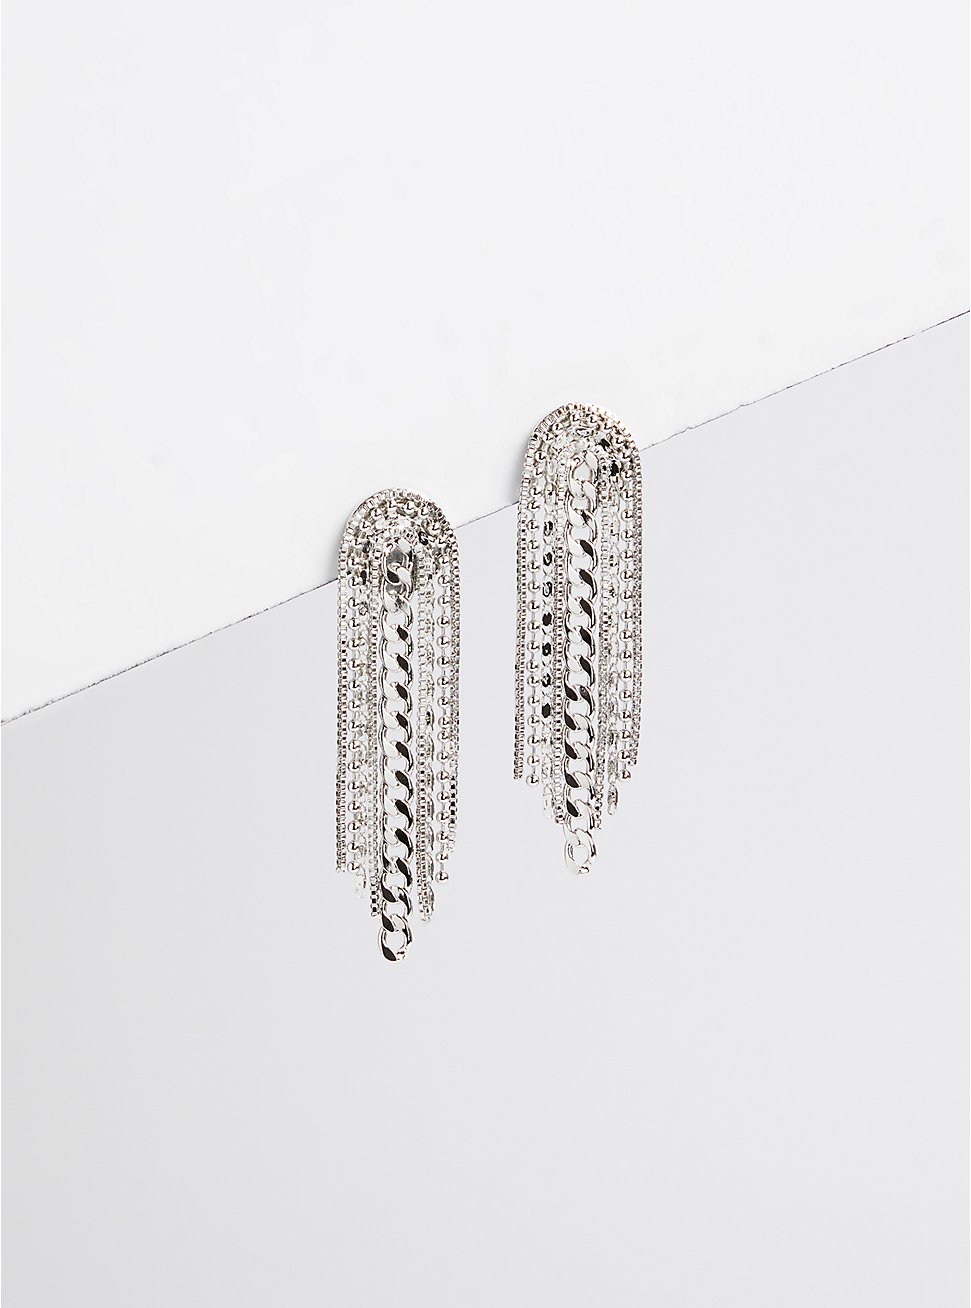 Plus Size Chain Link Earring - Silver Tone, , hi-res